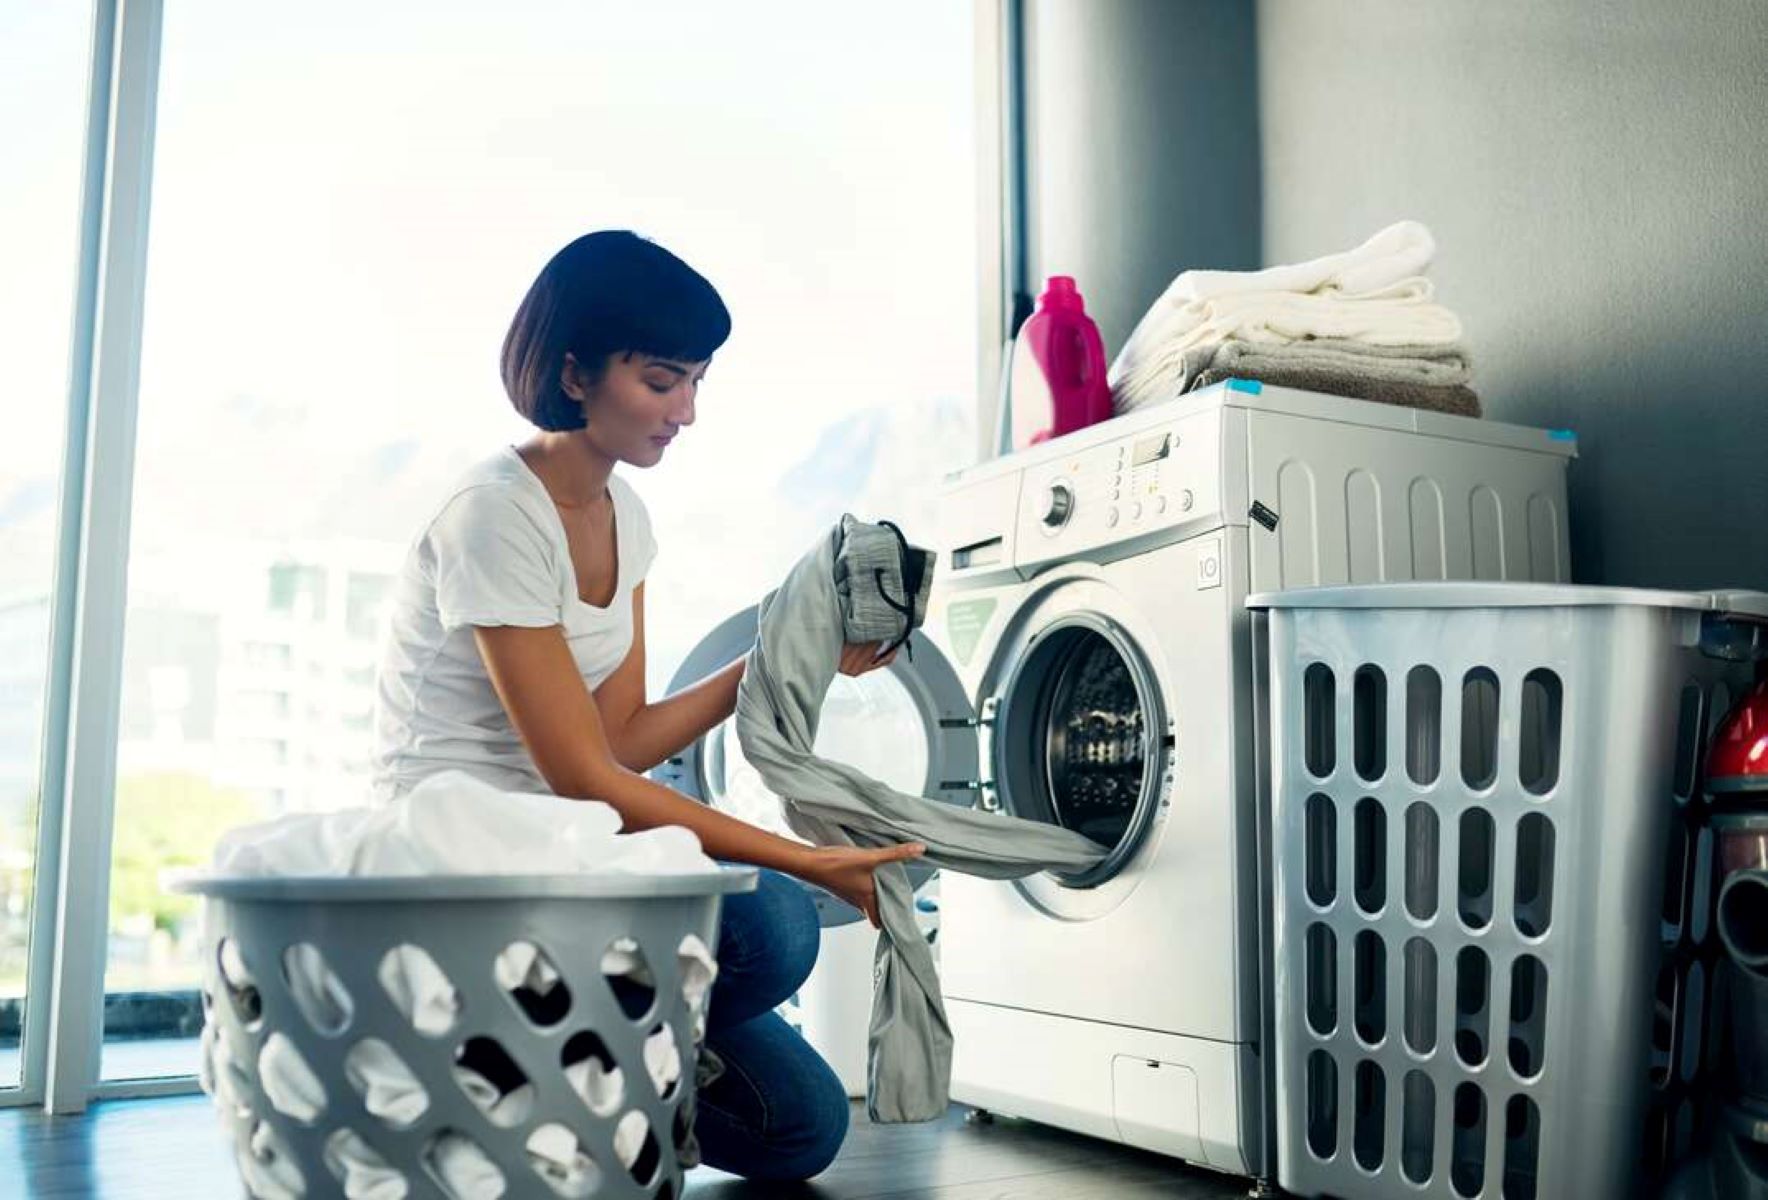 How To Fix The Error Code F40 For Whirlpool Dryer